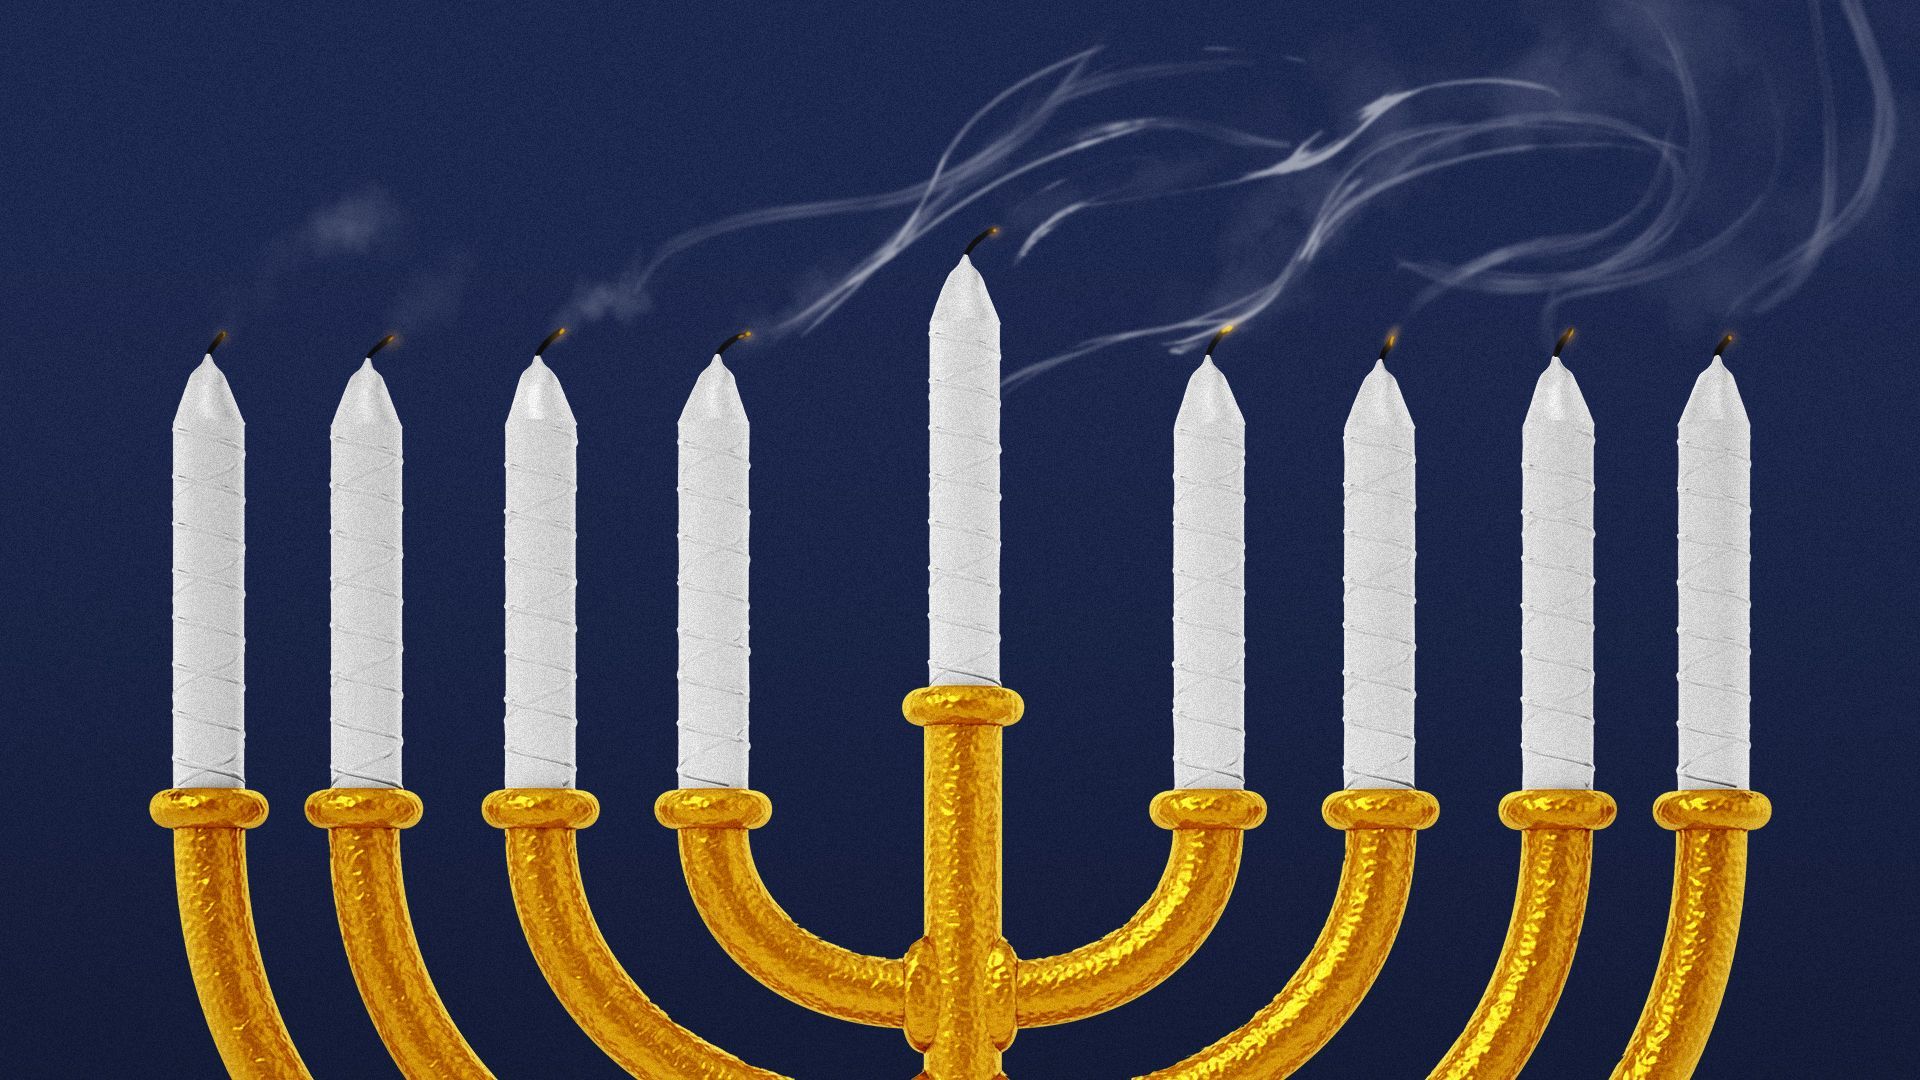 Illustration of the candles on a menorah blown out.